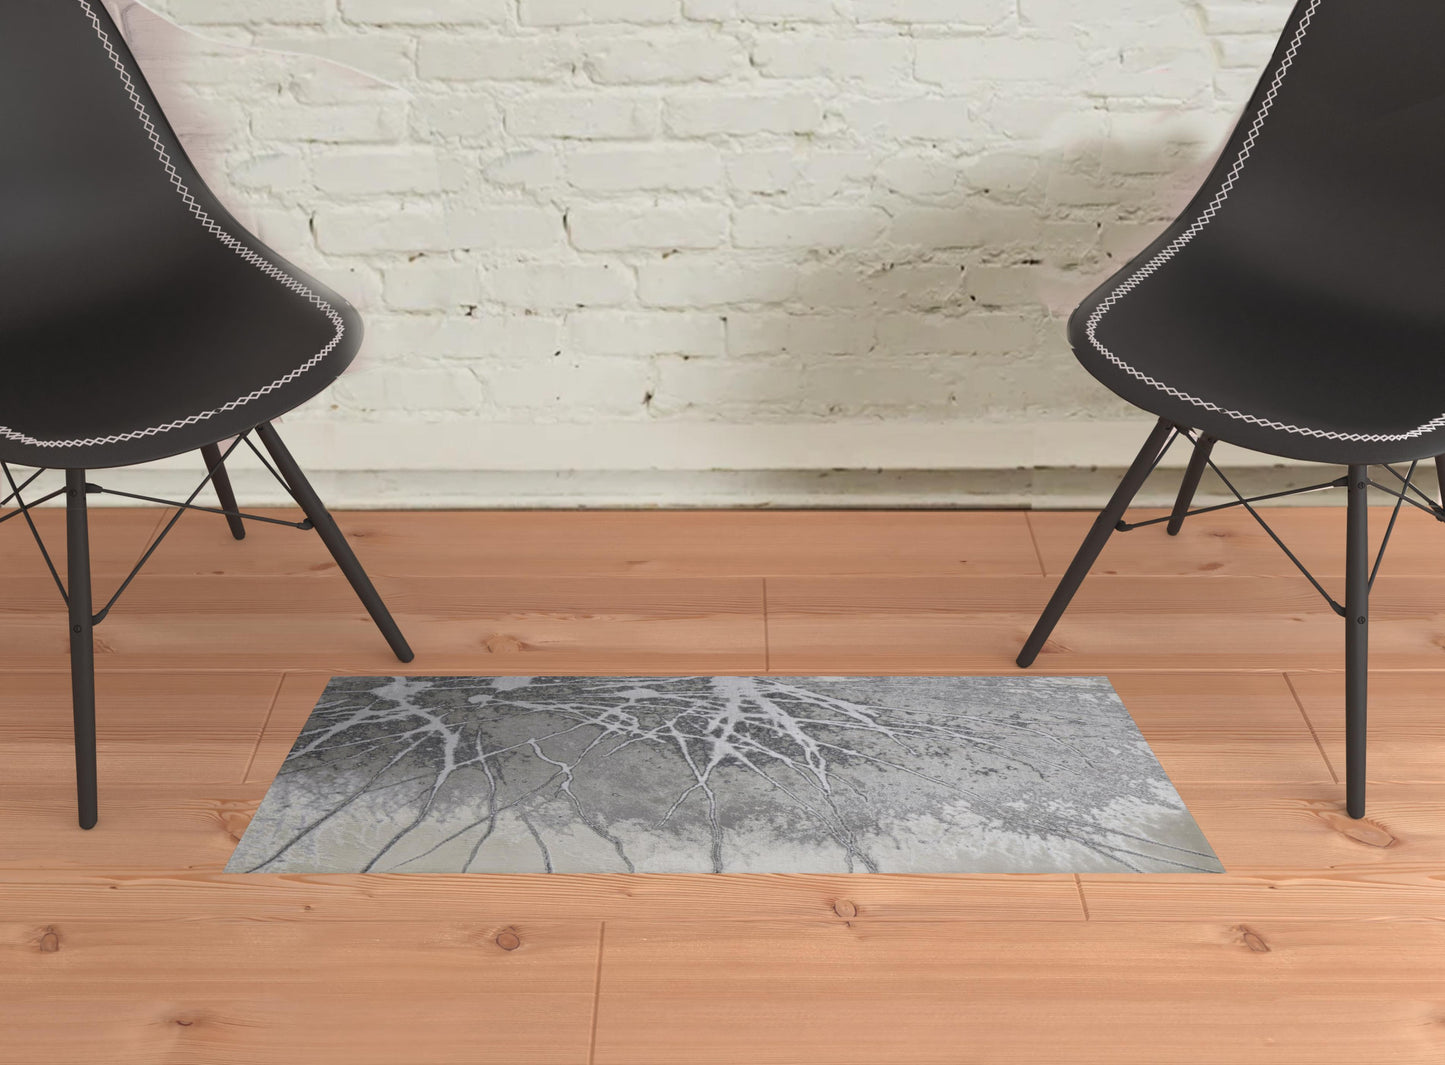 10' X 13' Gray Silver And Ivory Abstract Power Loom Area Rug